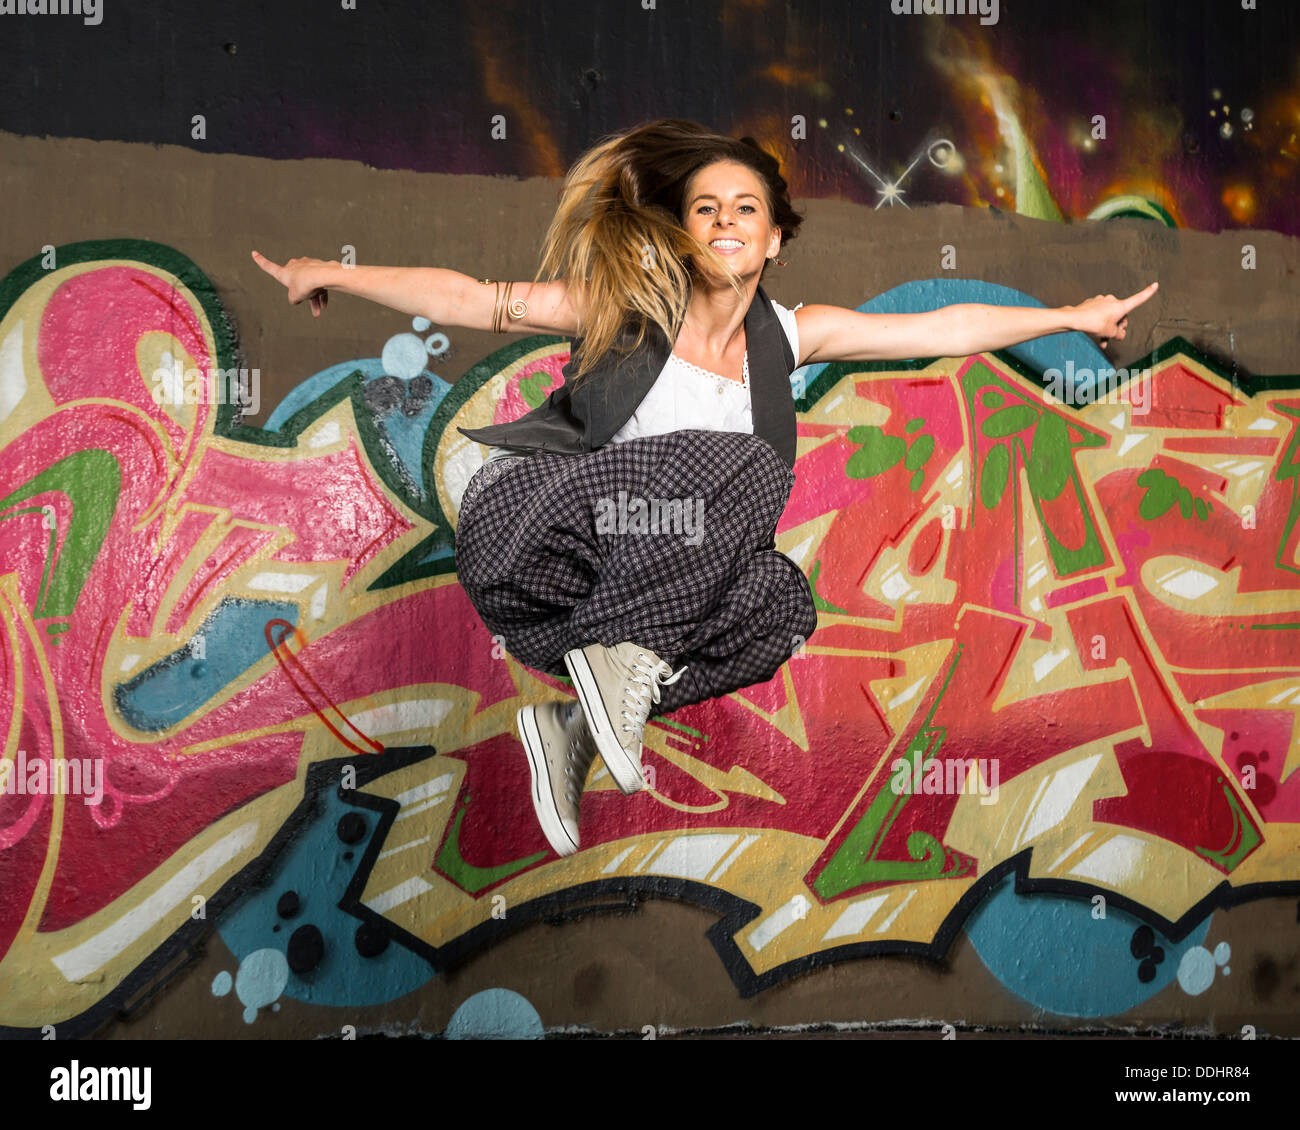 Hip-hop dancer jumping in front of a wall with graffiti Stock Photo